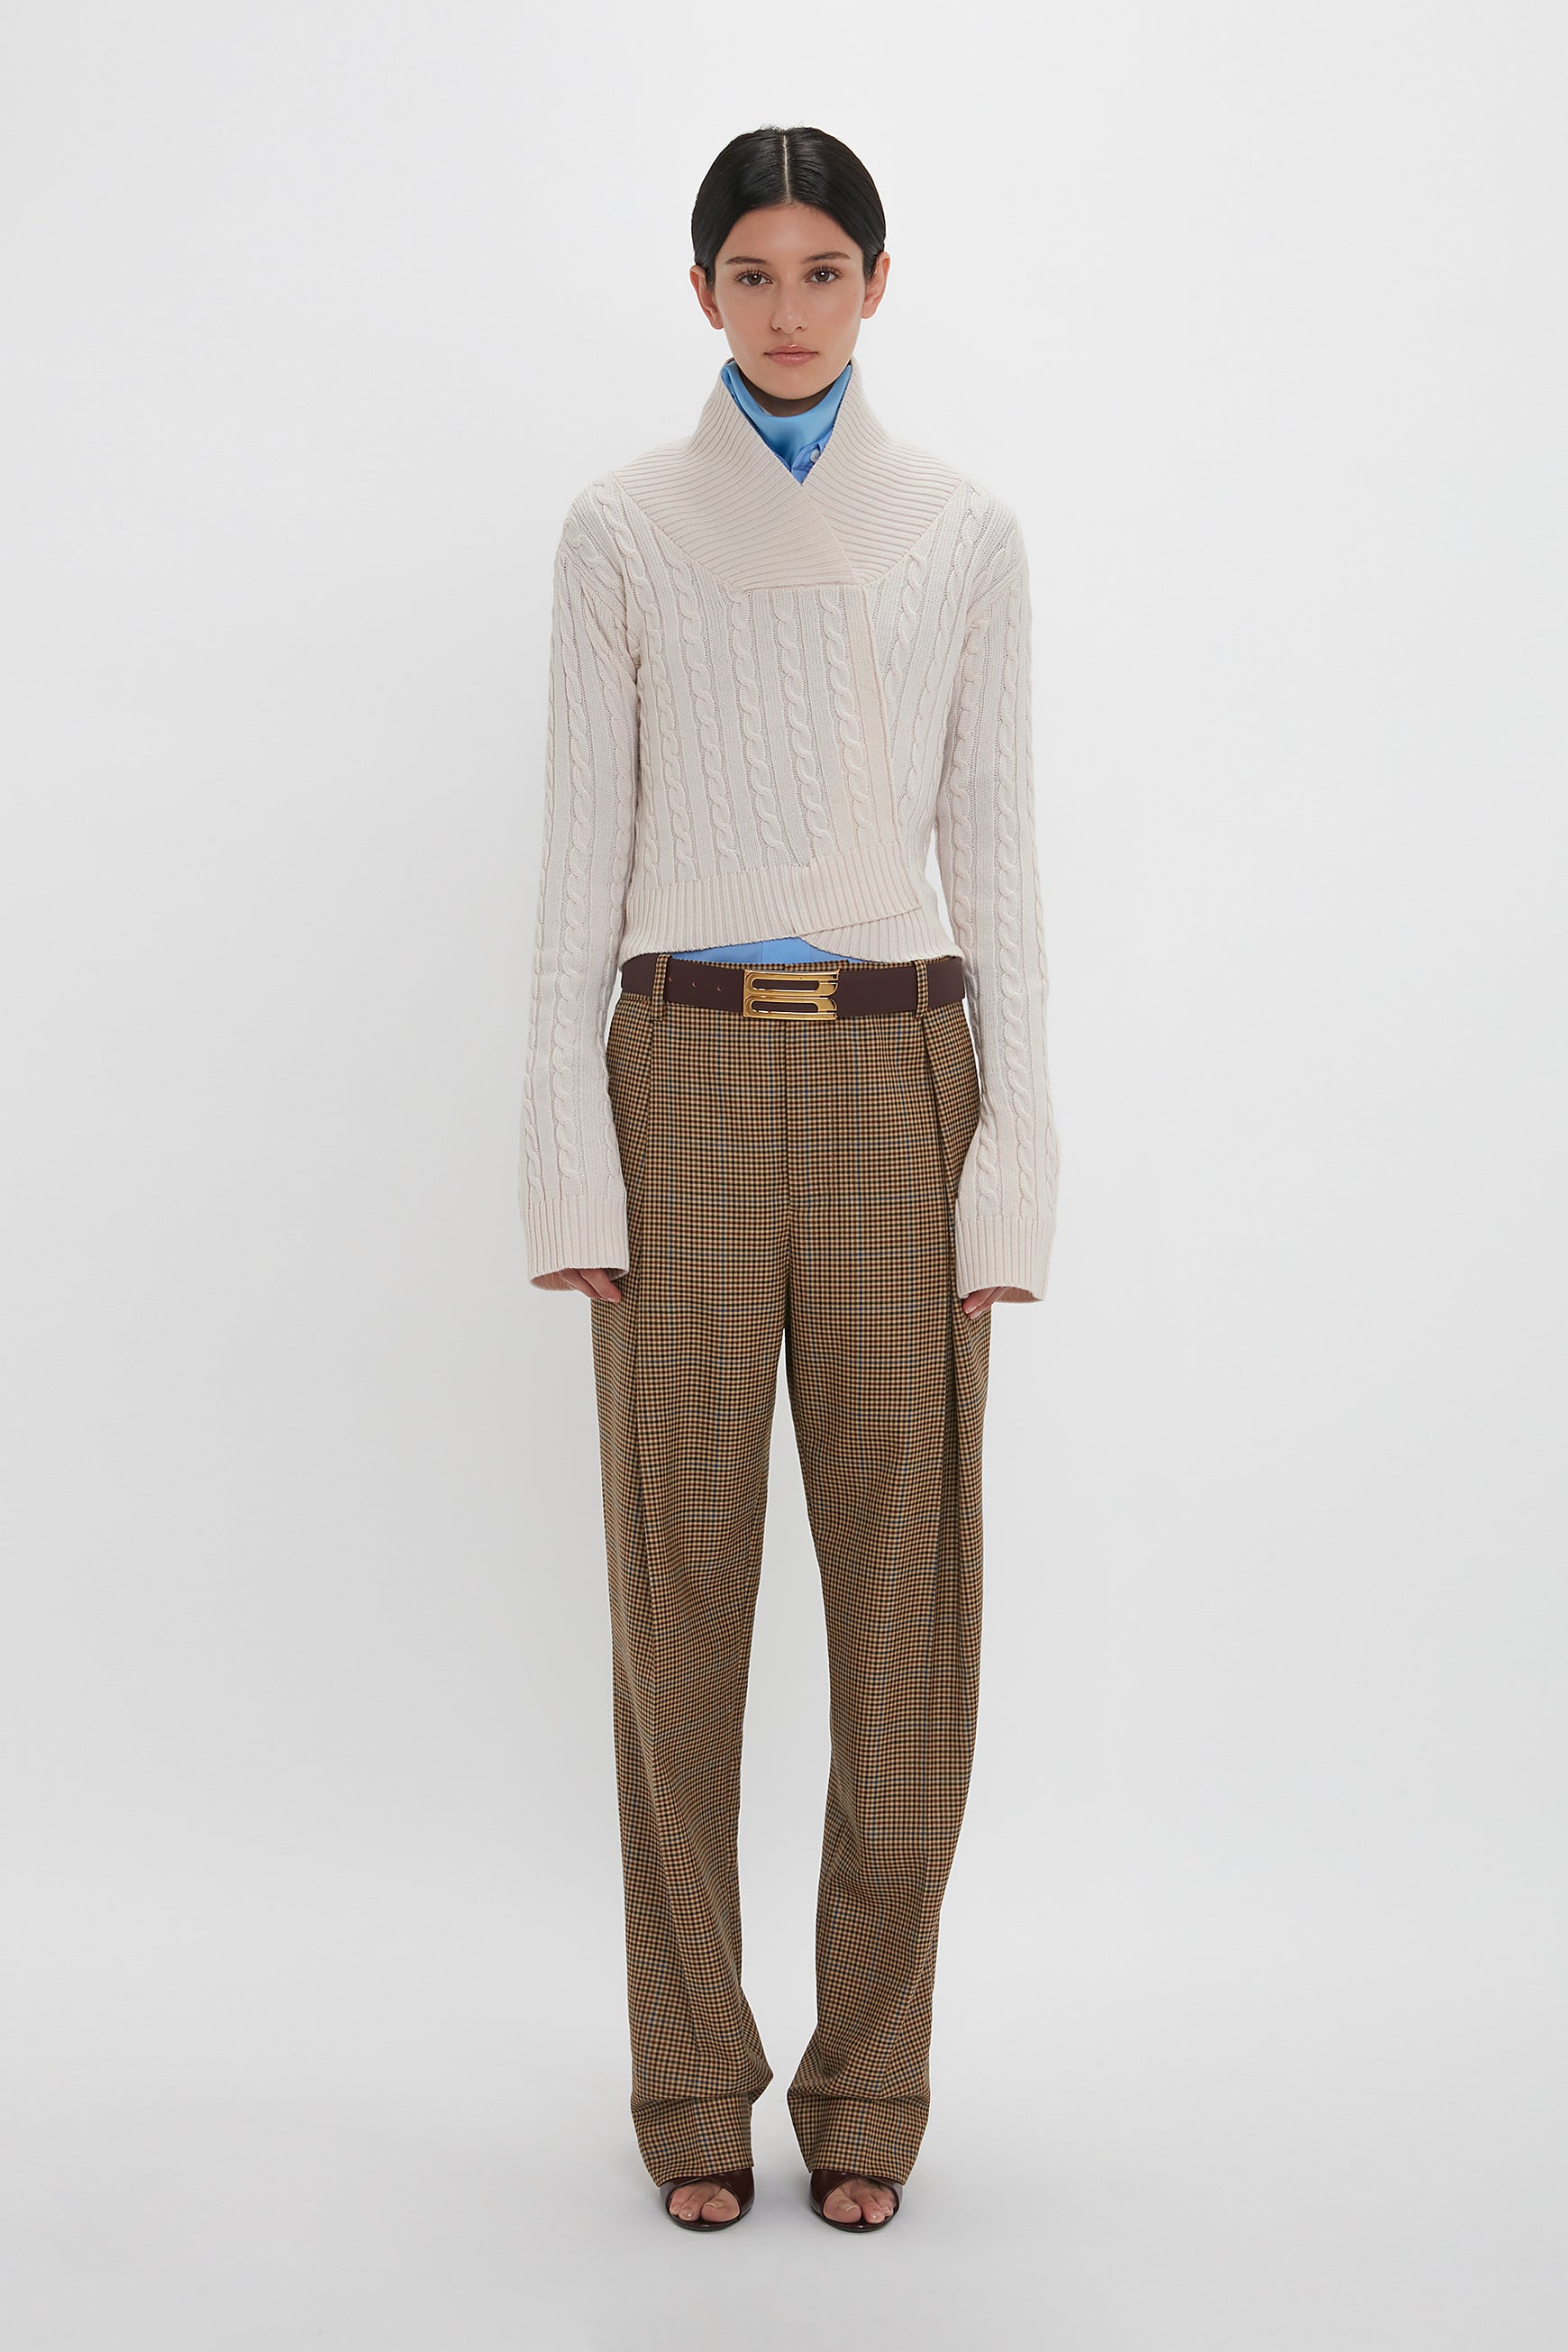 Person standing against a plain background, wearing a Wrap Detail Jumper In Bone by Victoria Beckham, brown plaid trousers, blue shirt underneath, and brown belt. They are looking straight ahead.